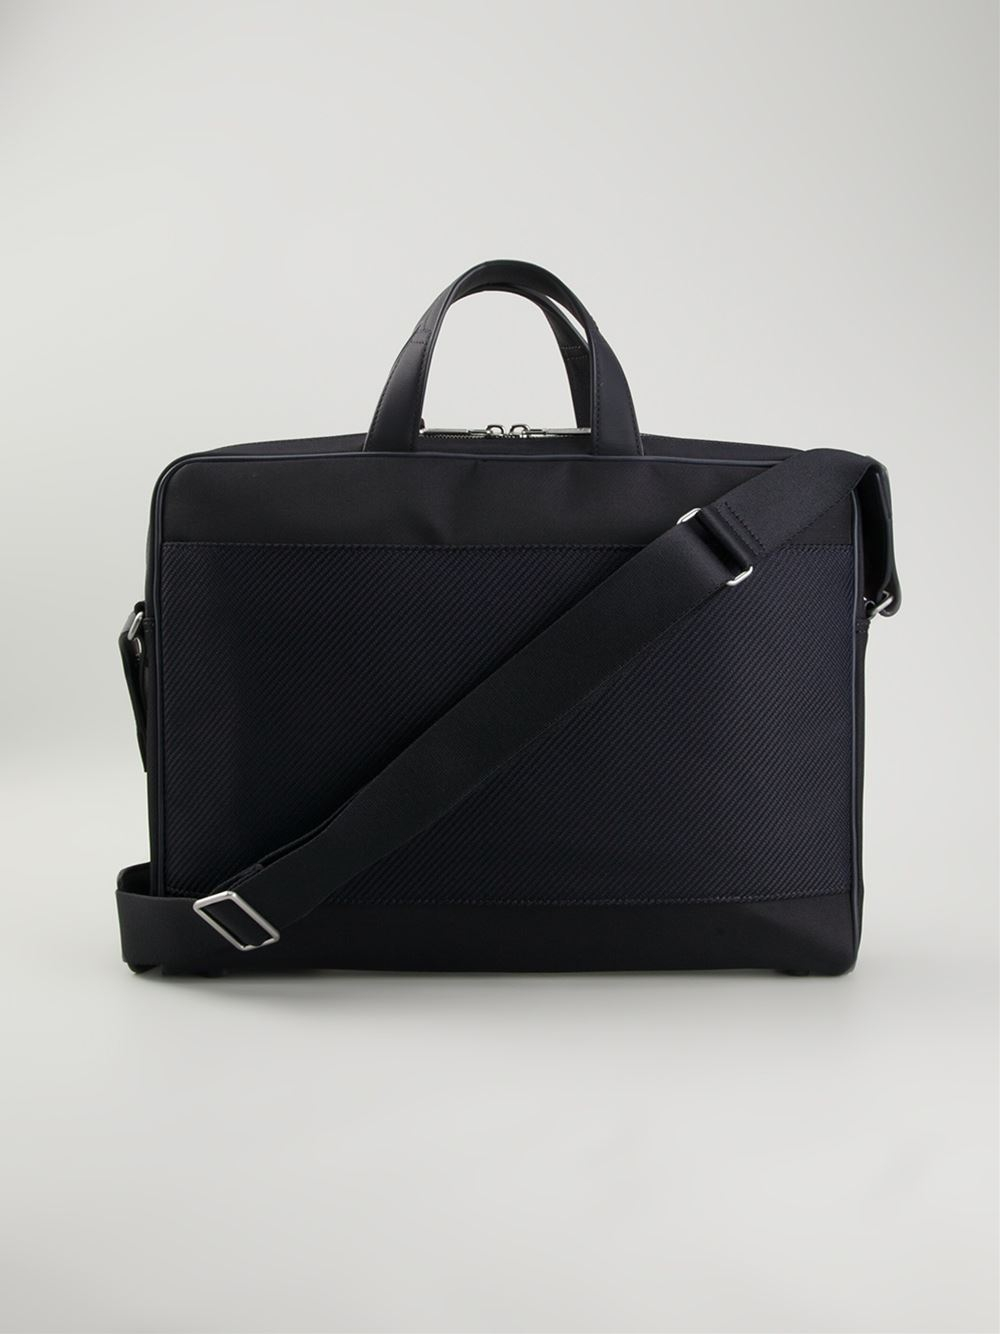 Lyst - Dunhill 'Traveller' Briefcase in Blue for Men